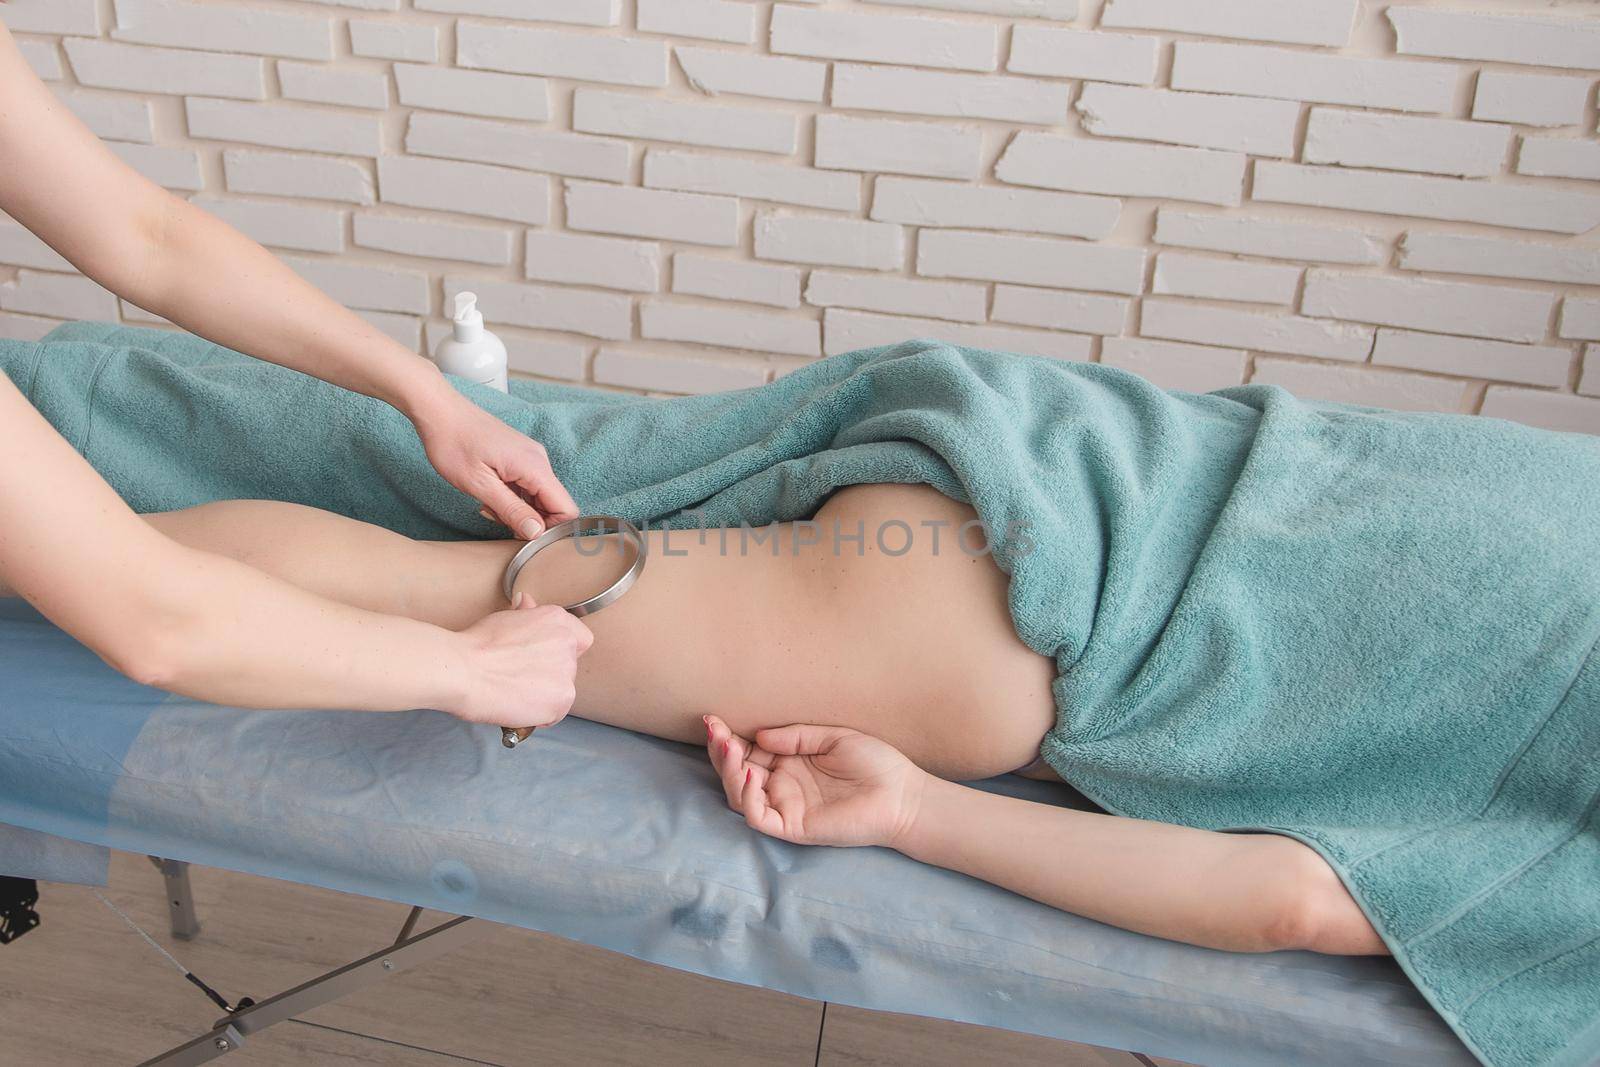 anti-cellulite foot massage in the spa salon makes the girl a cosmetology